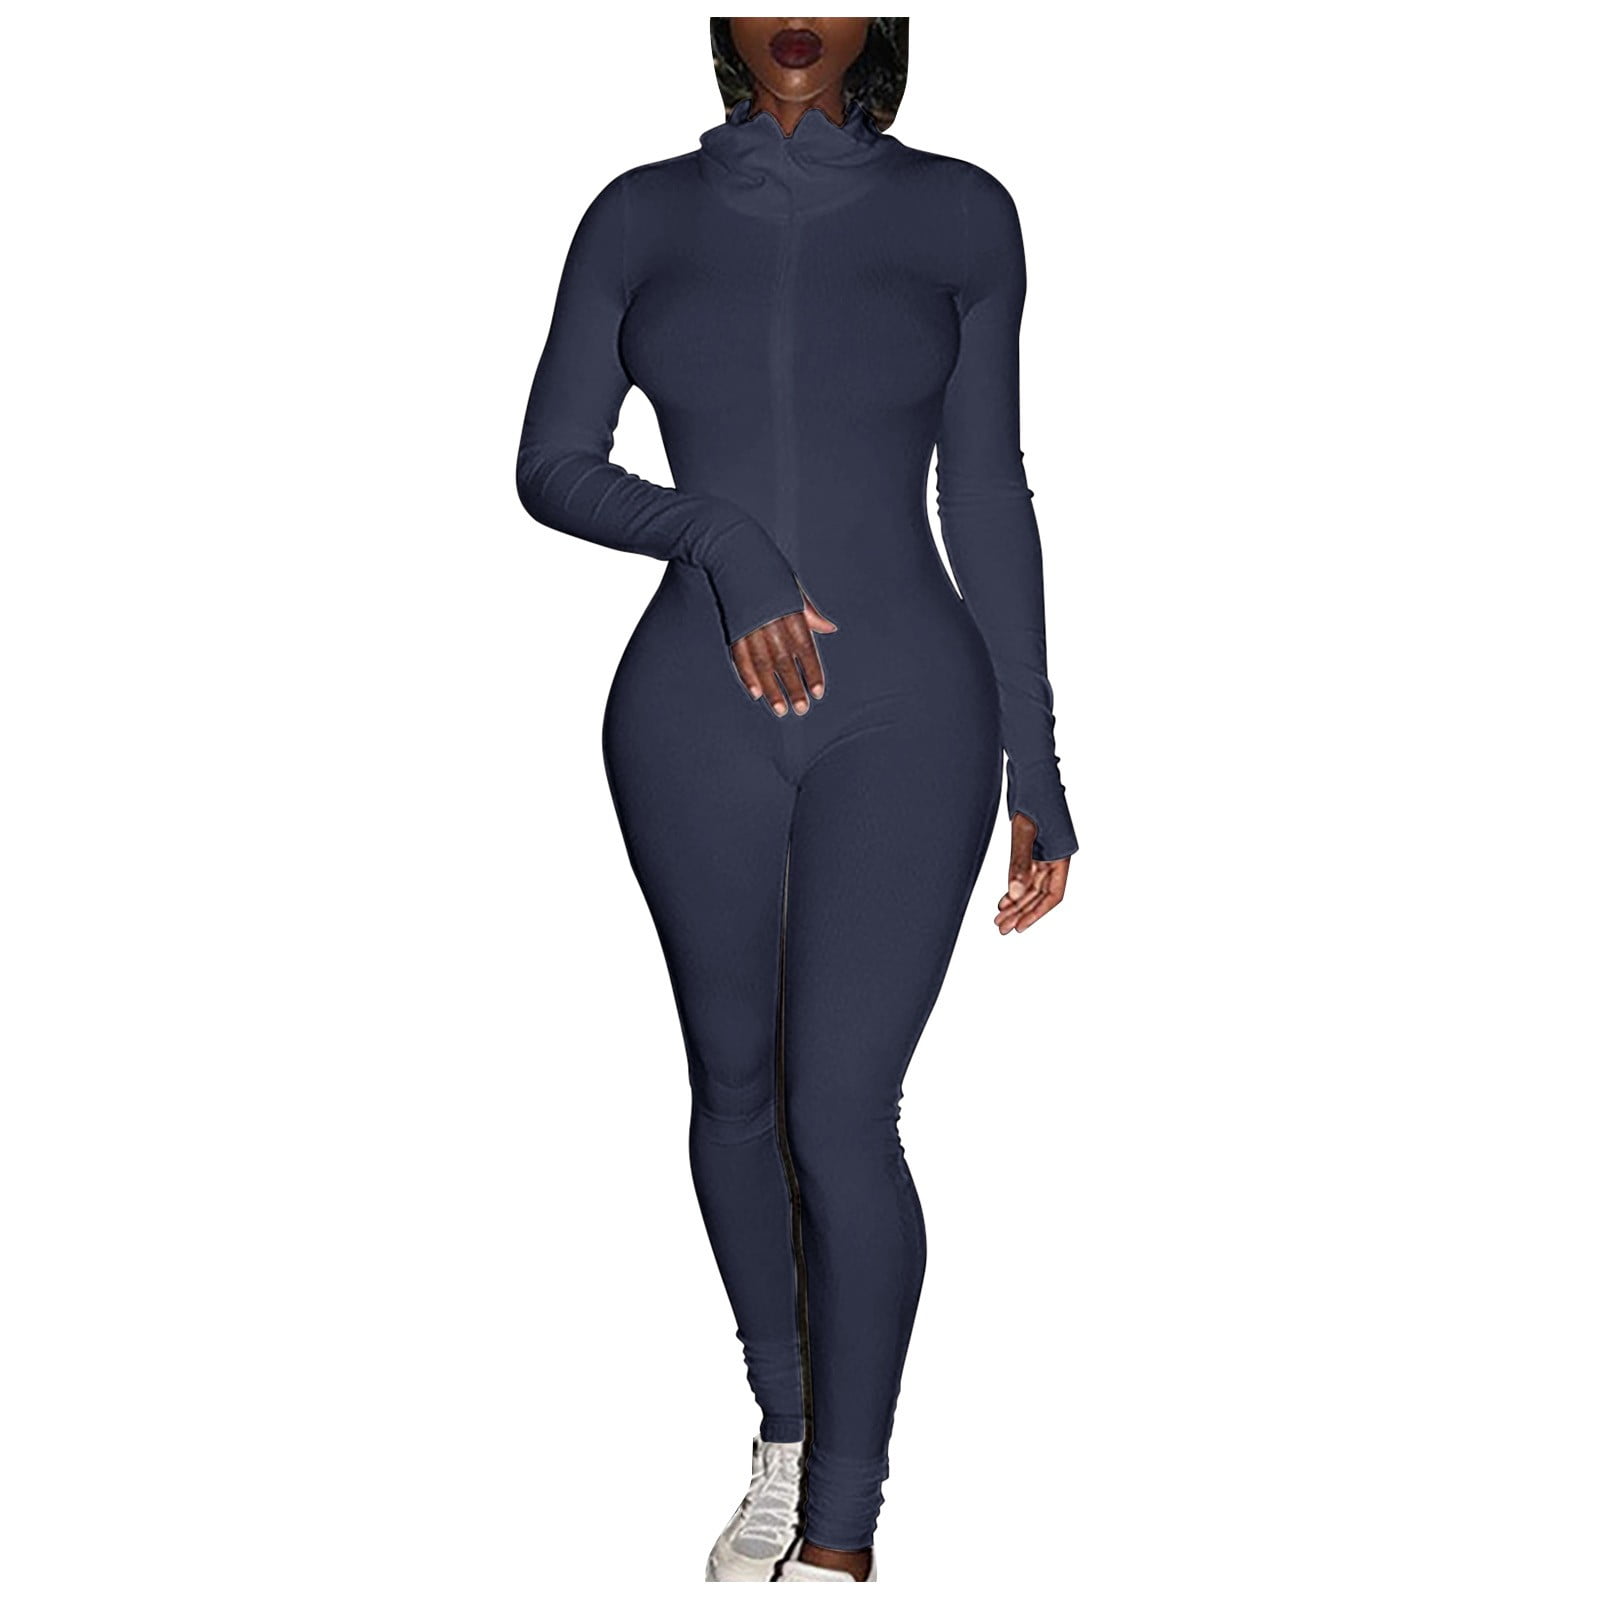 Womens Zipper Gym Long Sleeve Yoga Set Stretchy Running Shirts And Leggings  For Fitness And Jogging From Amoyoutfit, $21.01